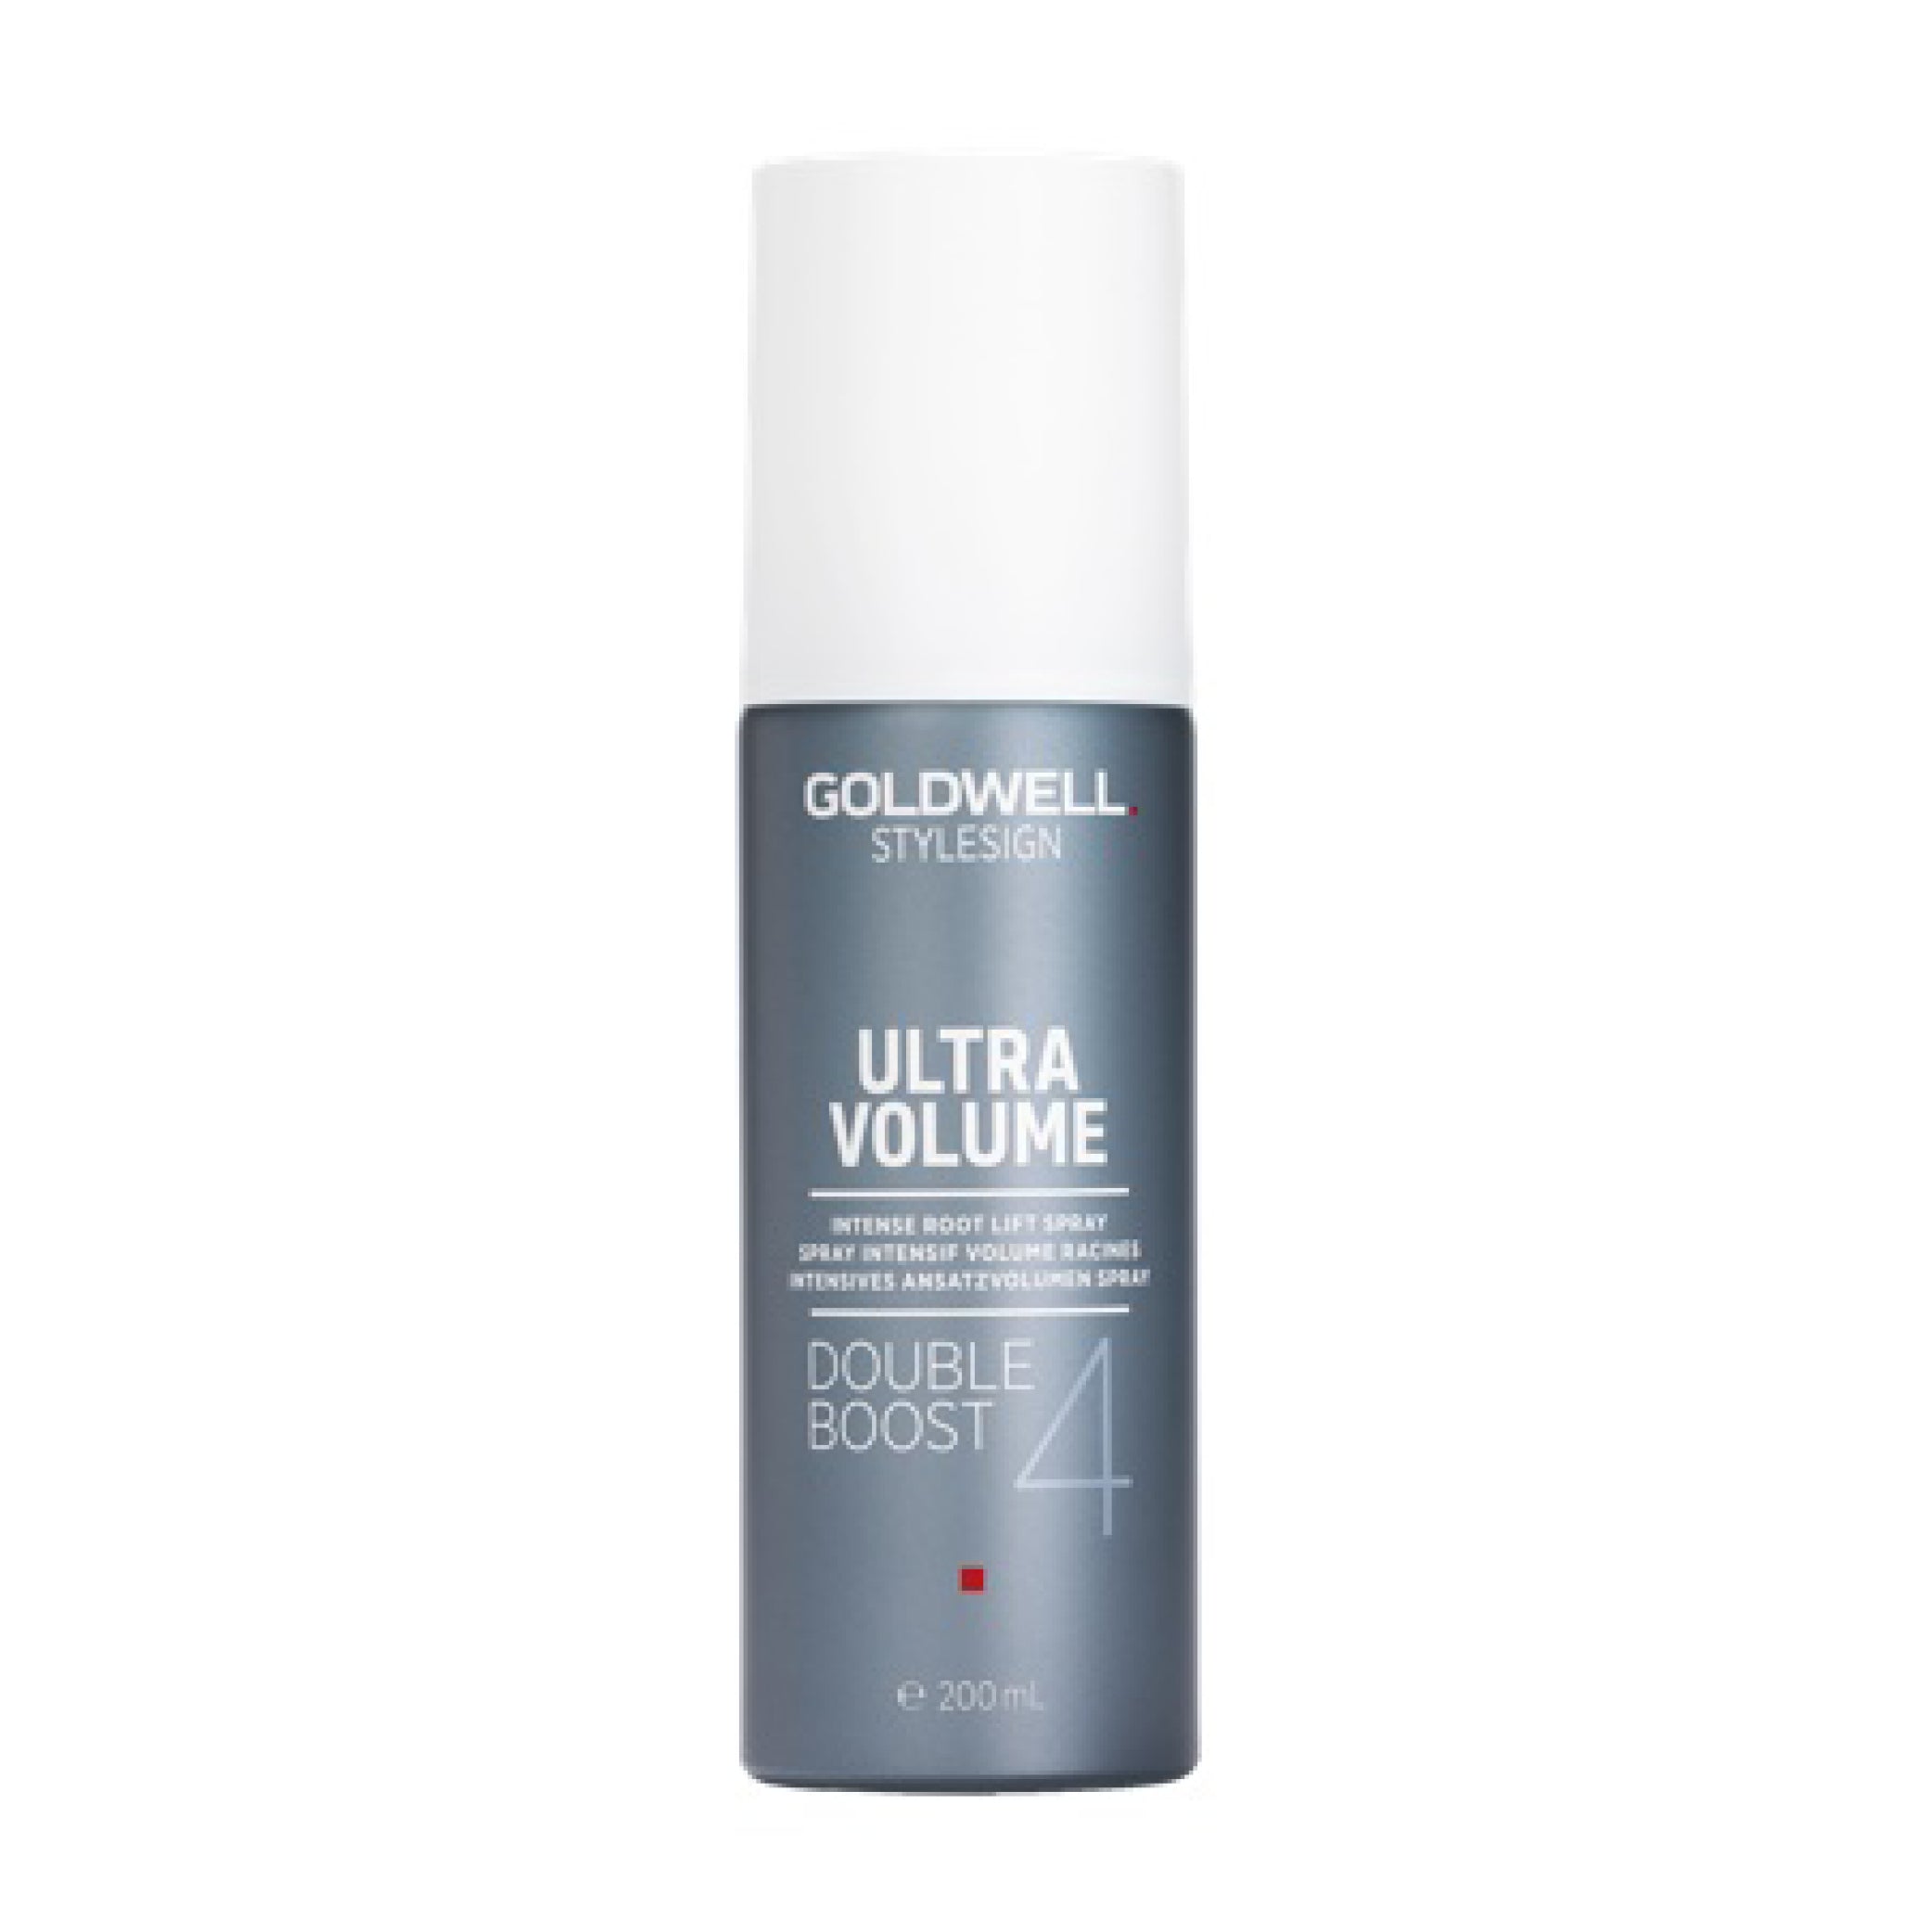 Double Boost - Intense Root Lift Spray